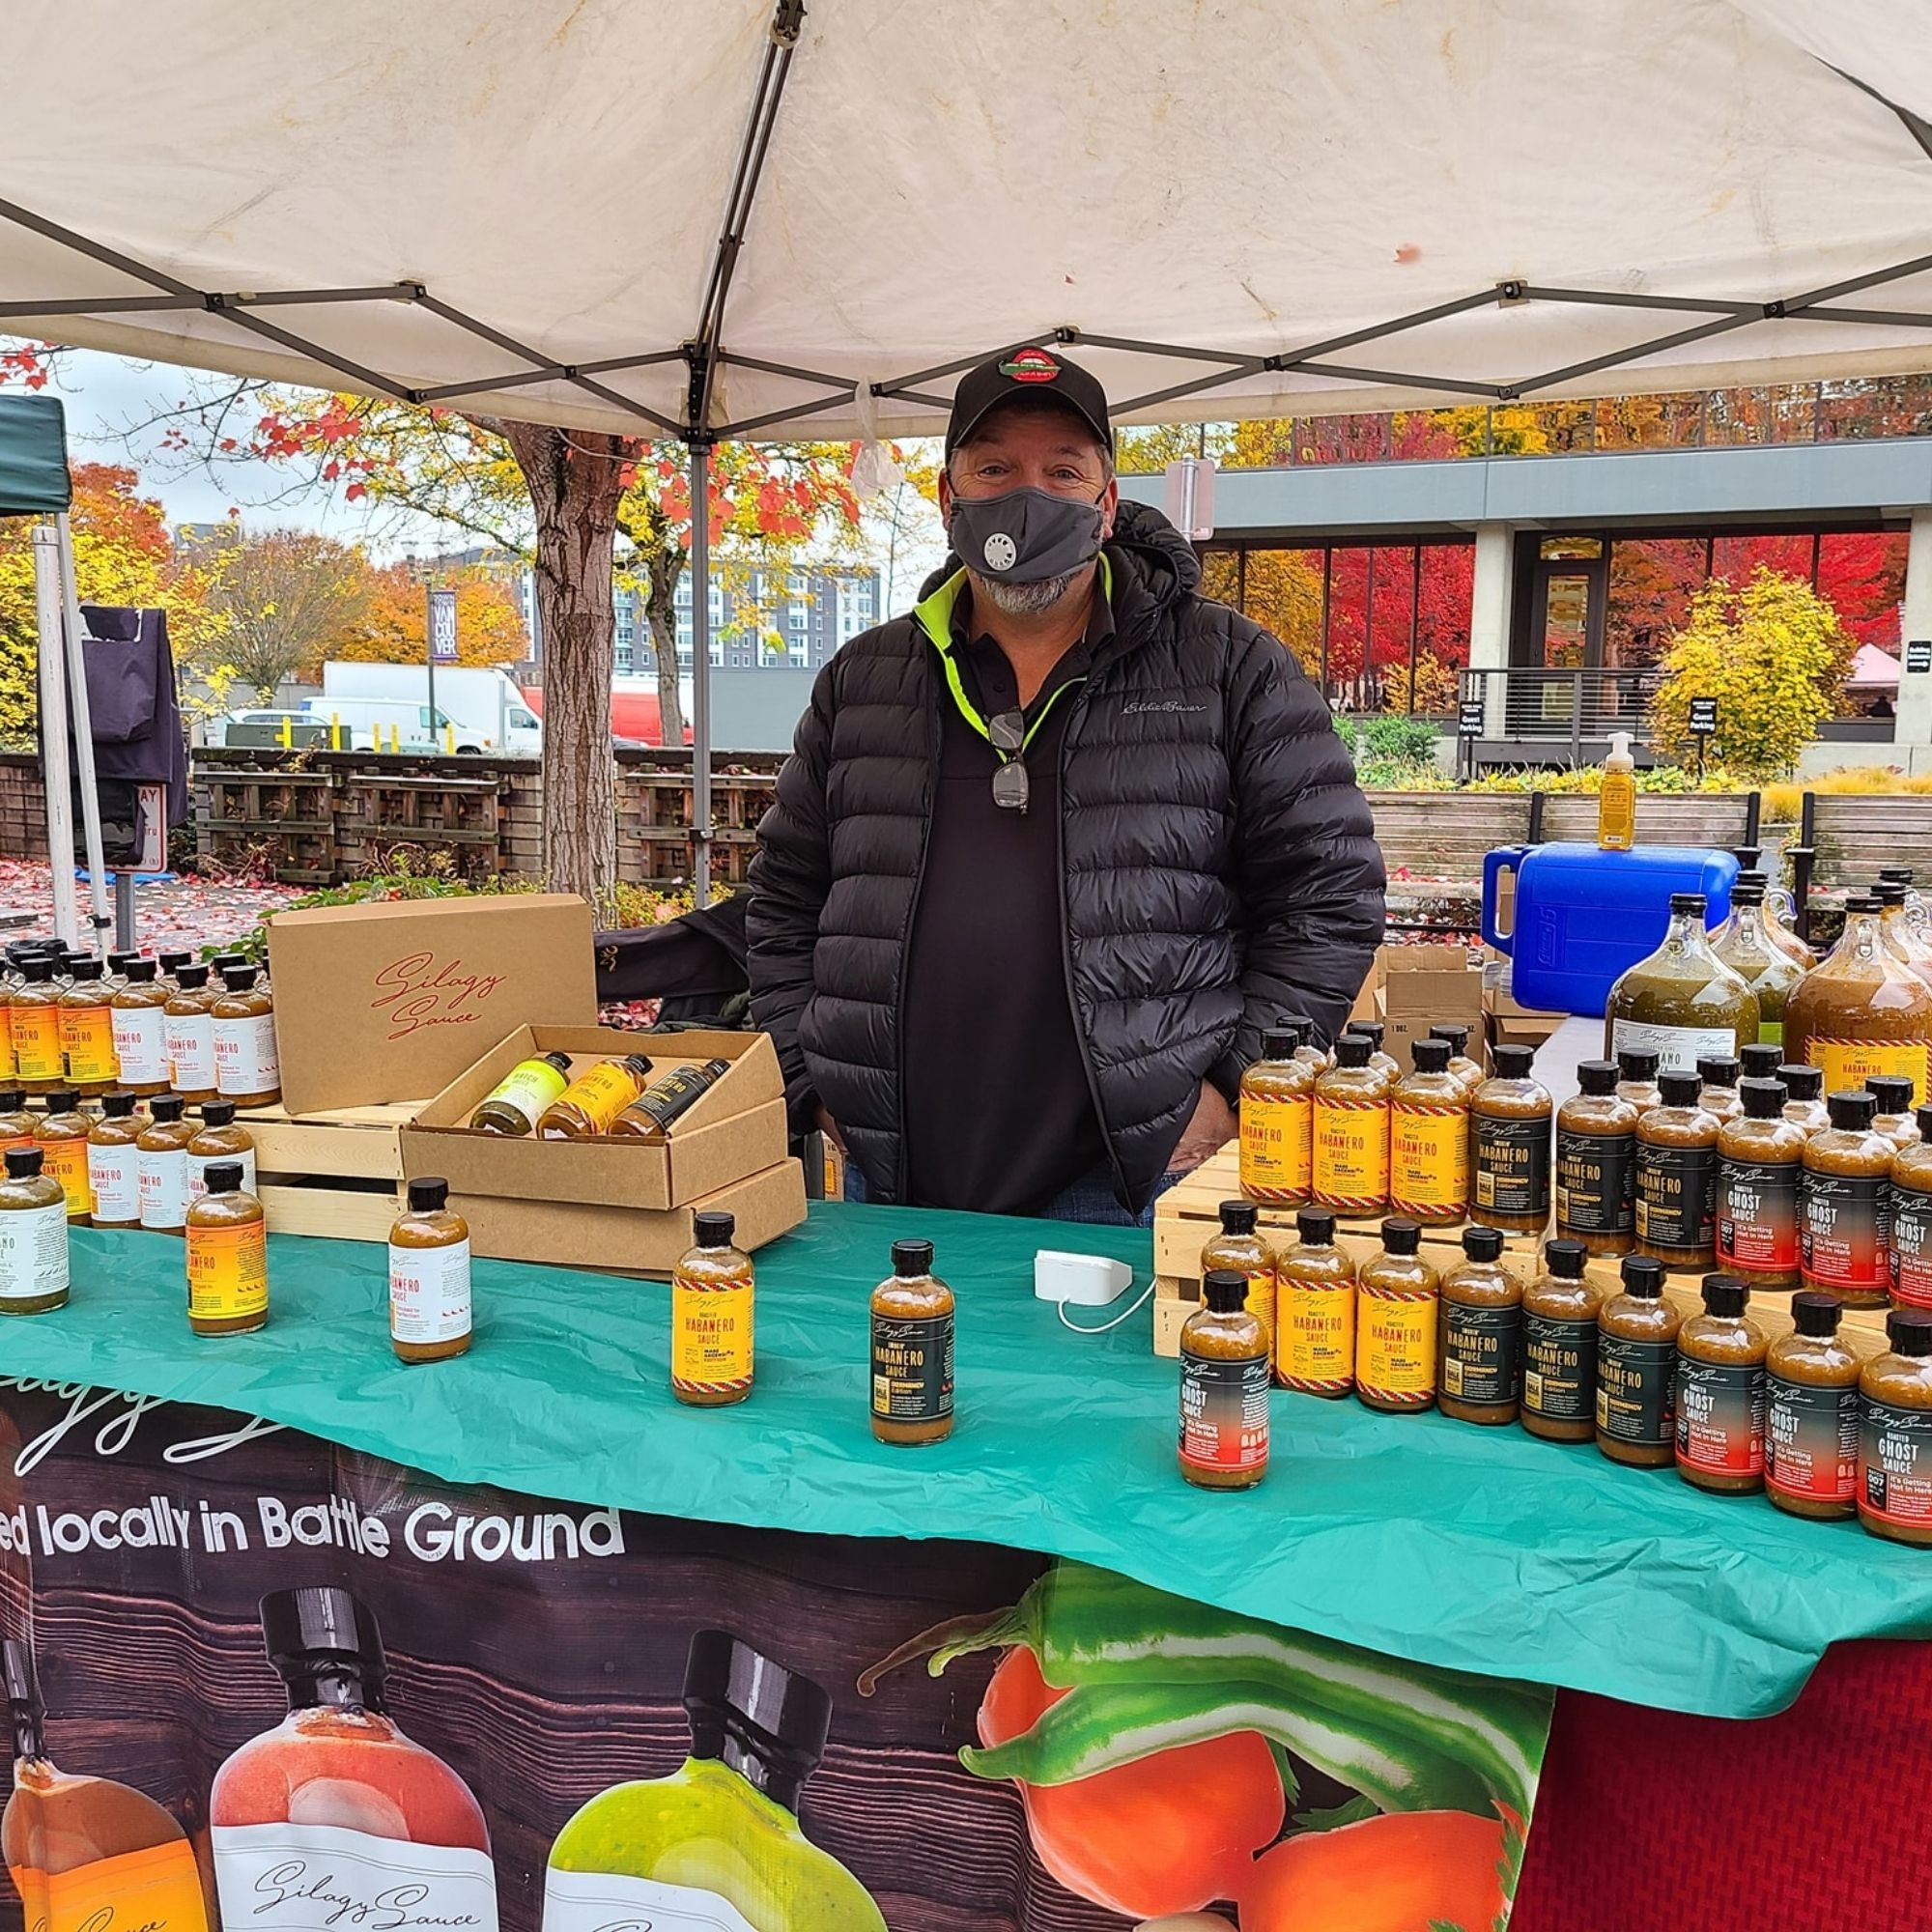 Dave of Silagy Sauce on Starting a Fire-Roasted Hot Sauce Company With His Sons